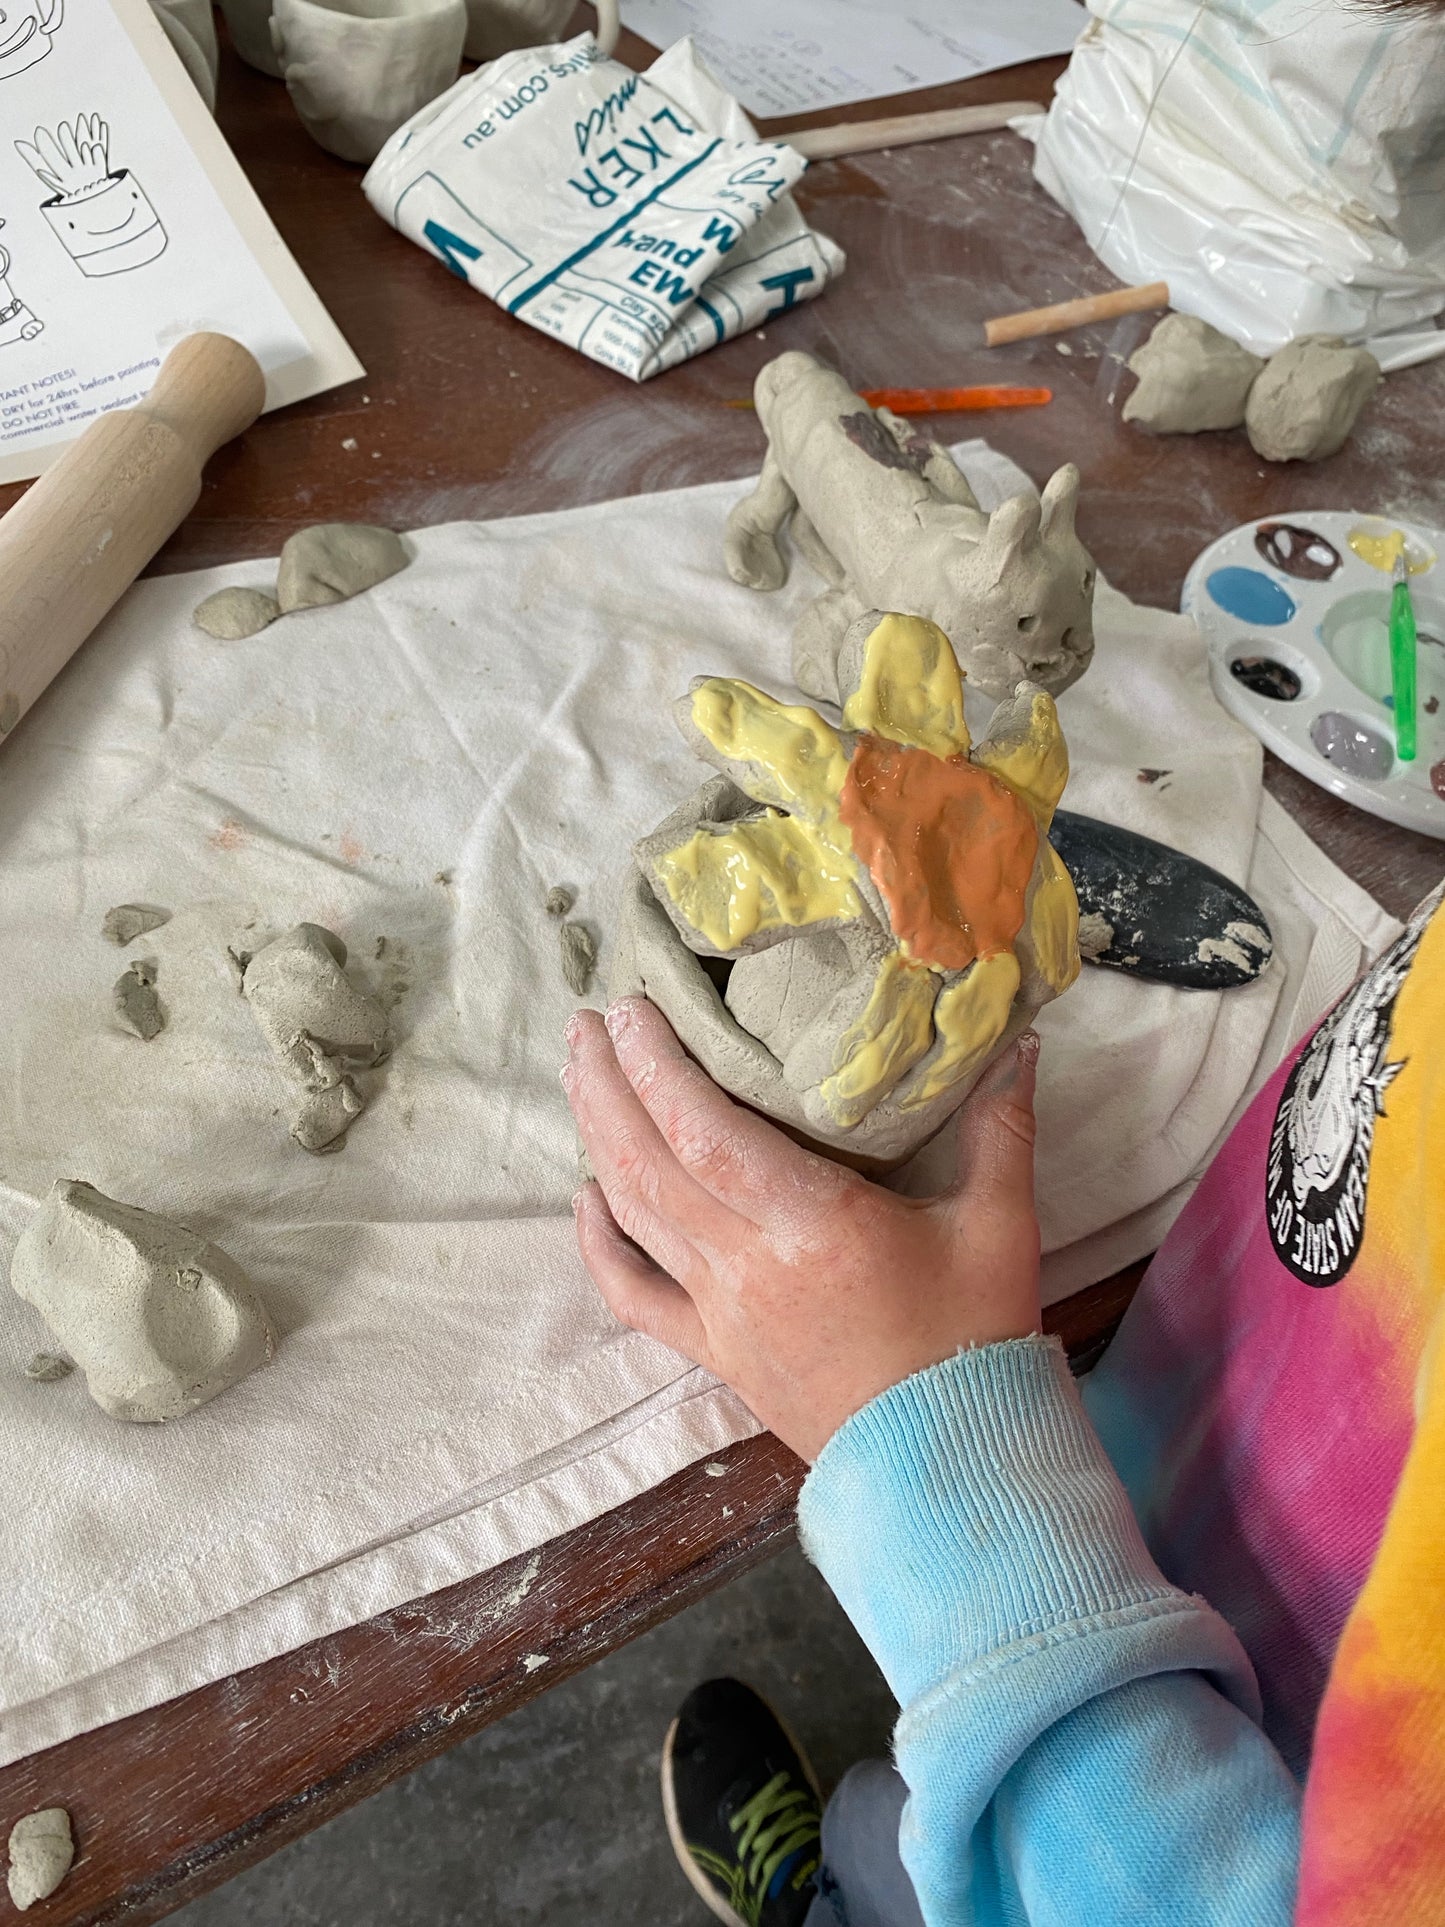 School Holiday Programme - HAND BUILDING WITH CLAY